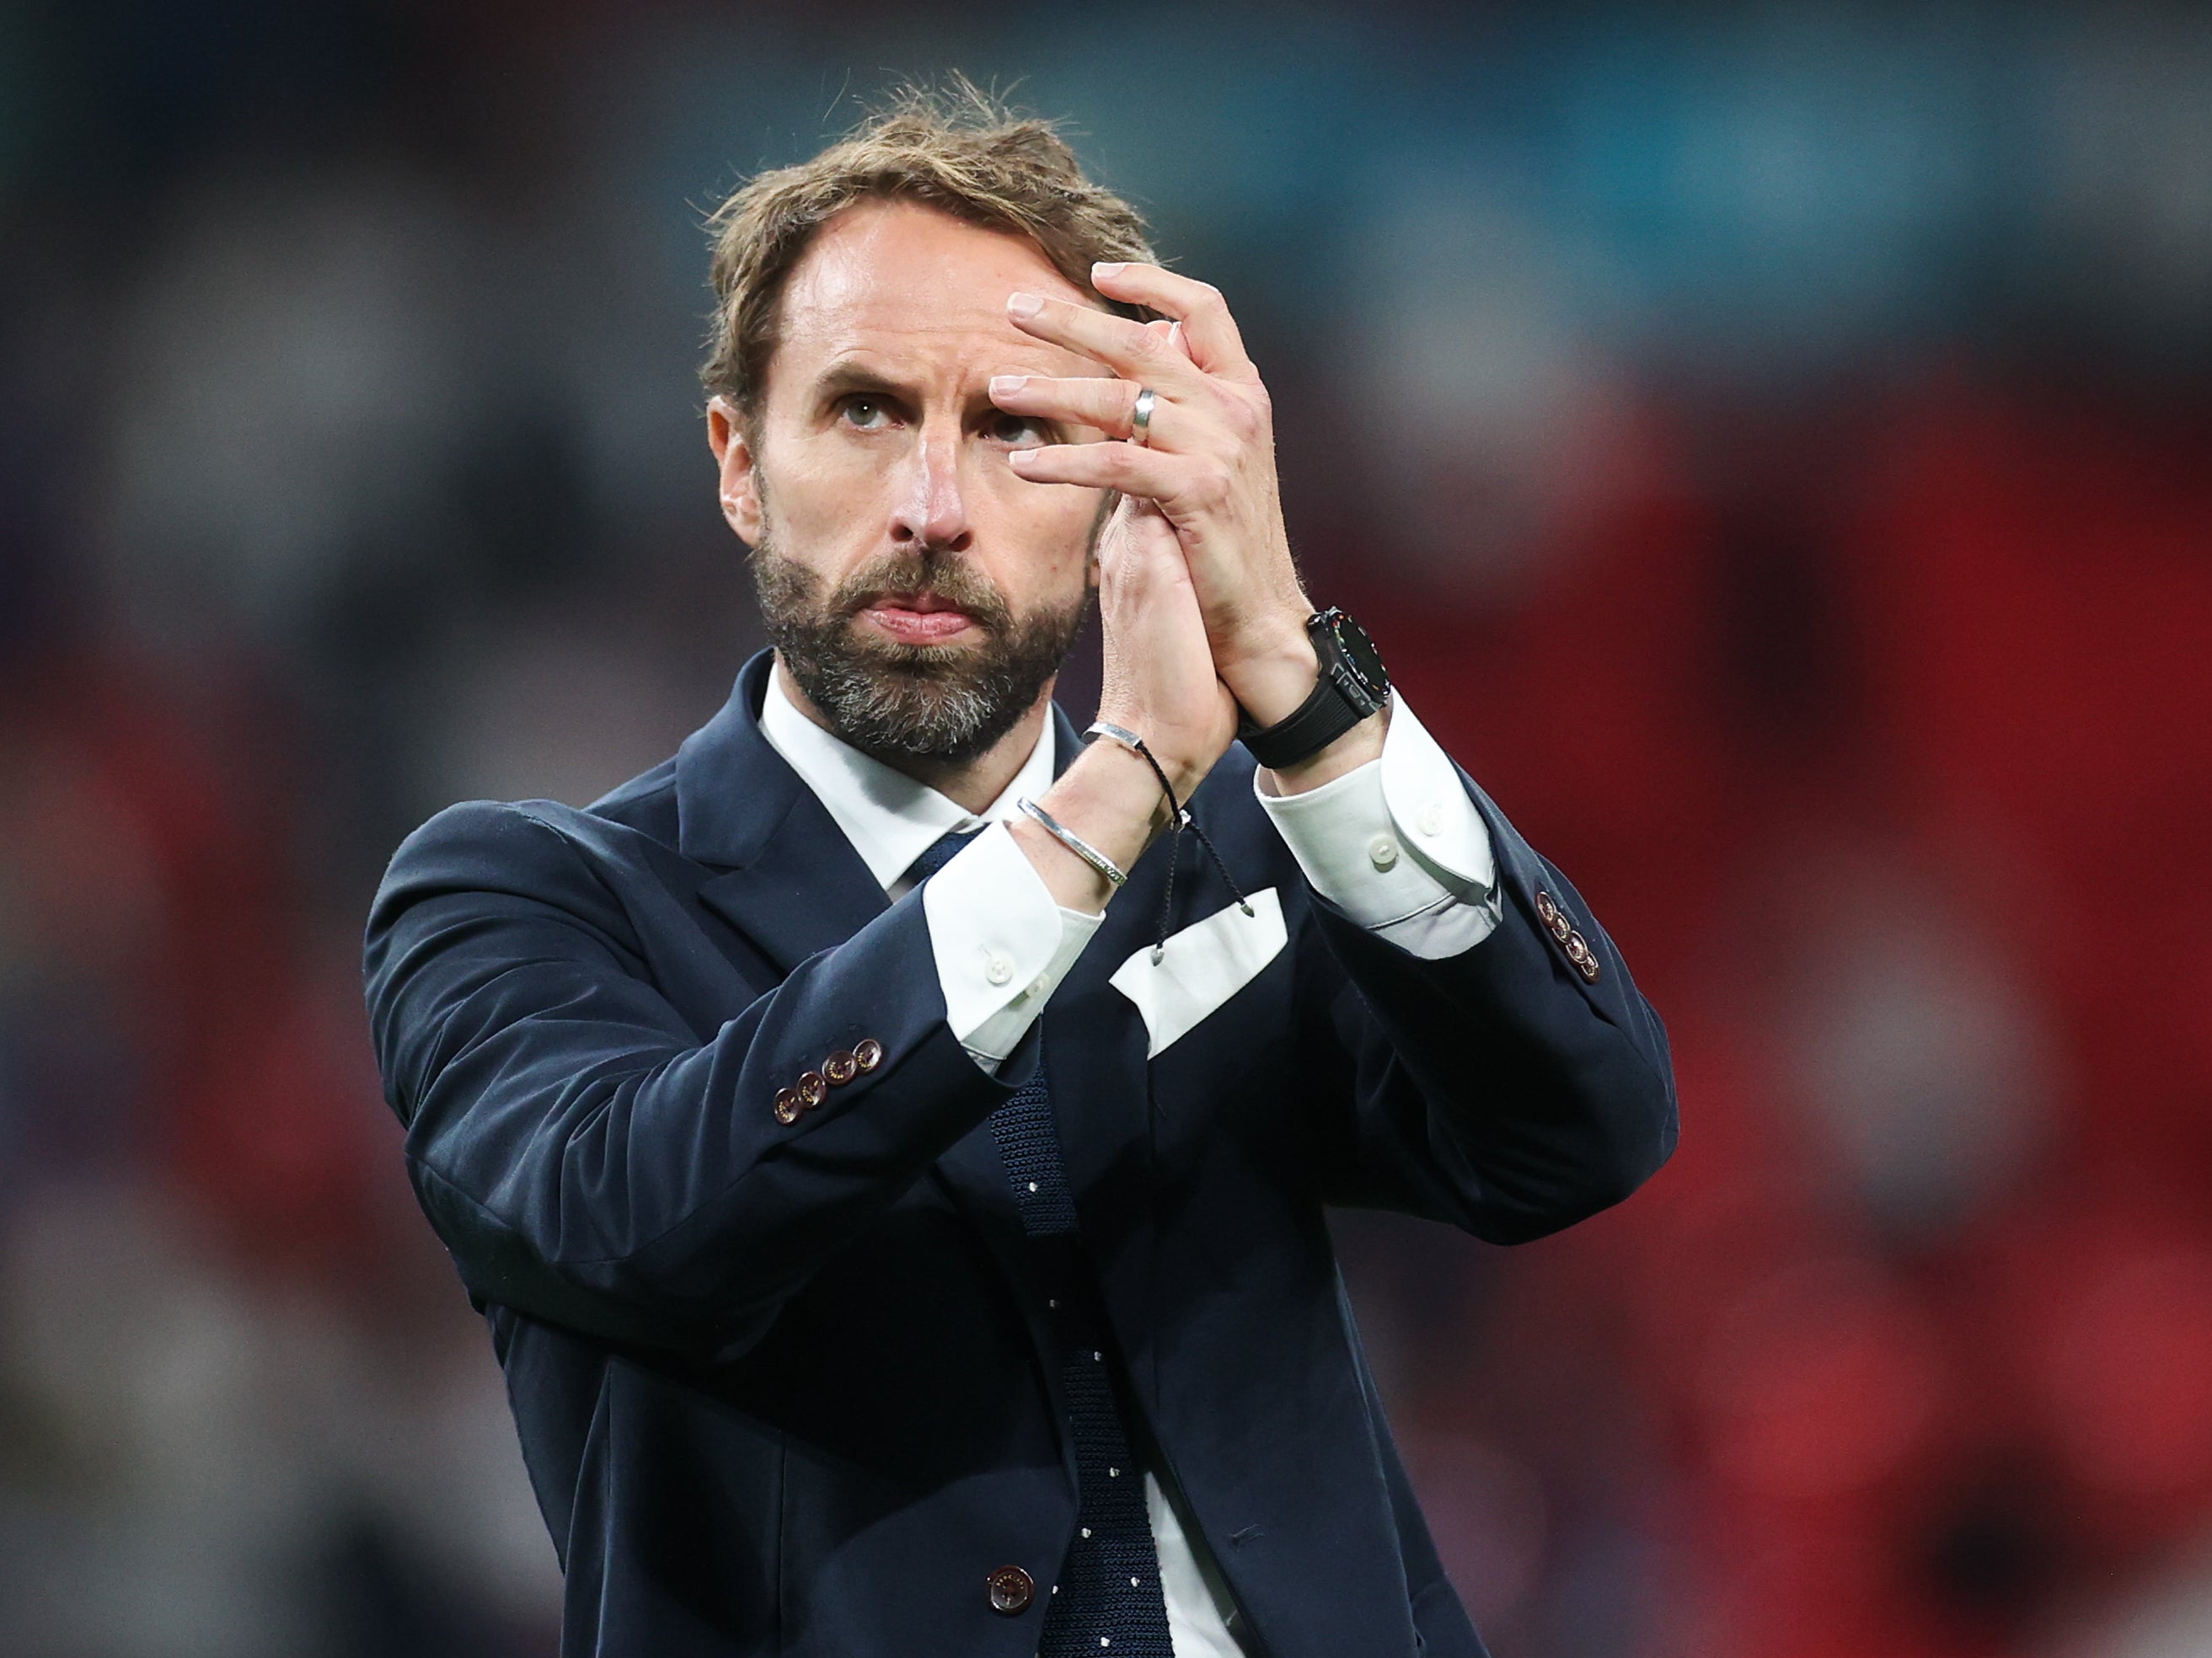 Gareth Southgate applauds fans after the Euro 2020 final